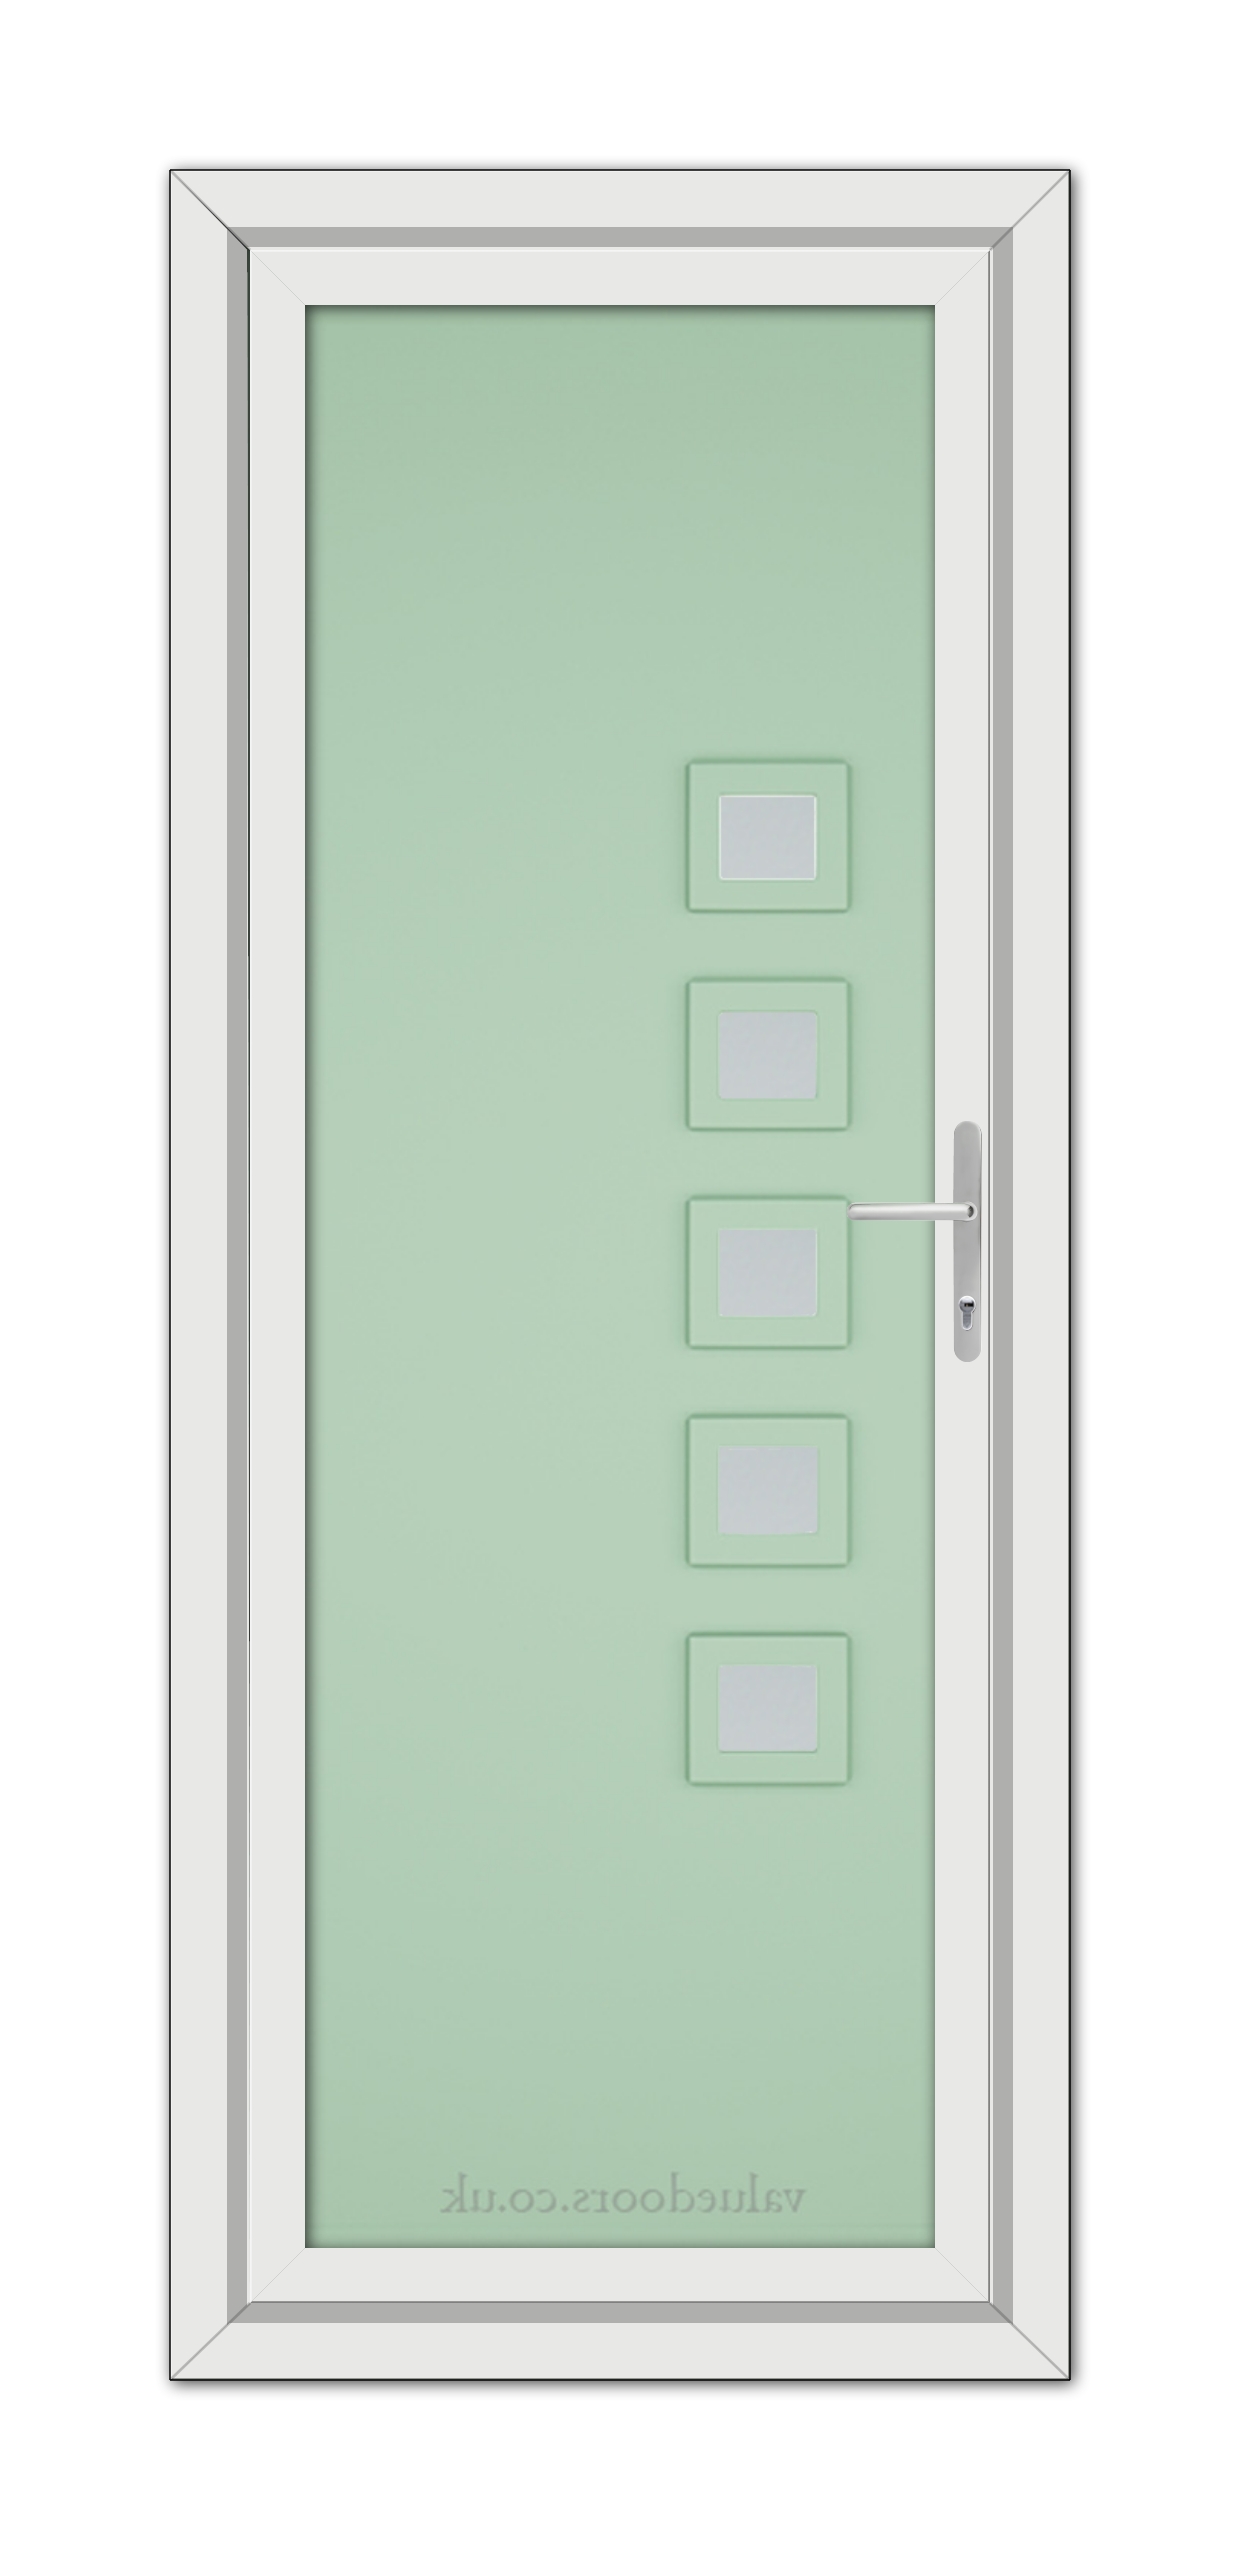 A white Chartwell Green Malaga uPVC door with green glass panels.